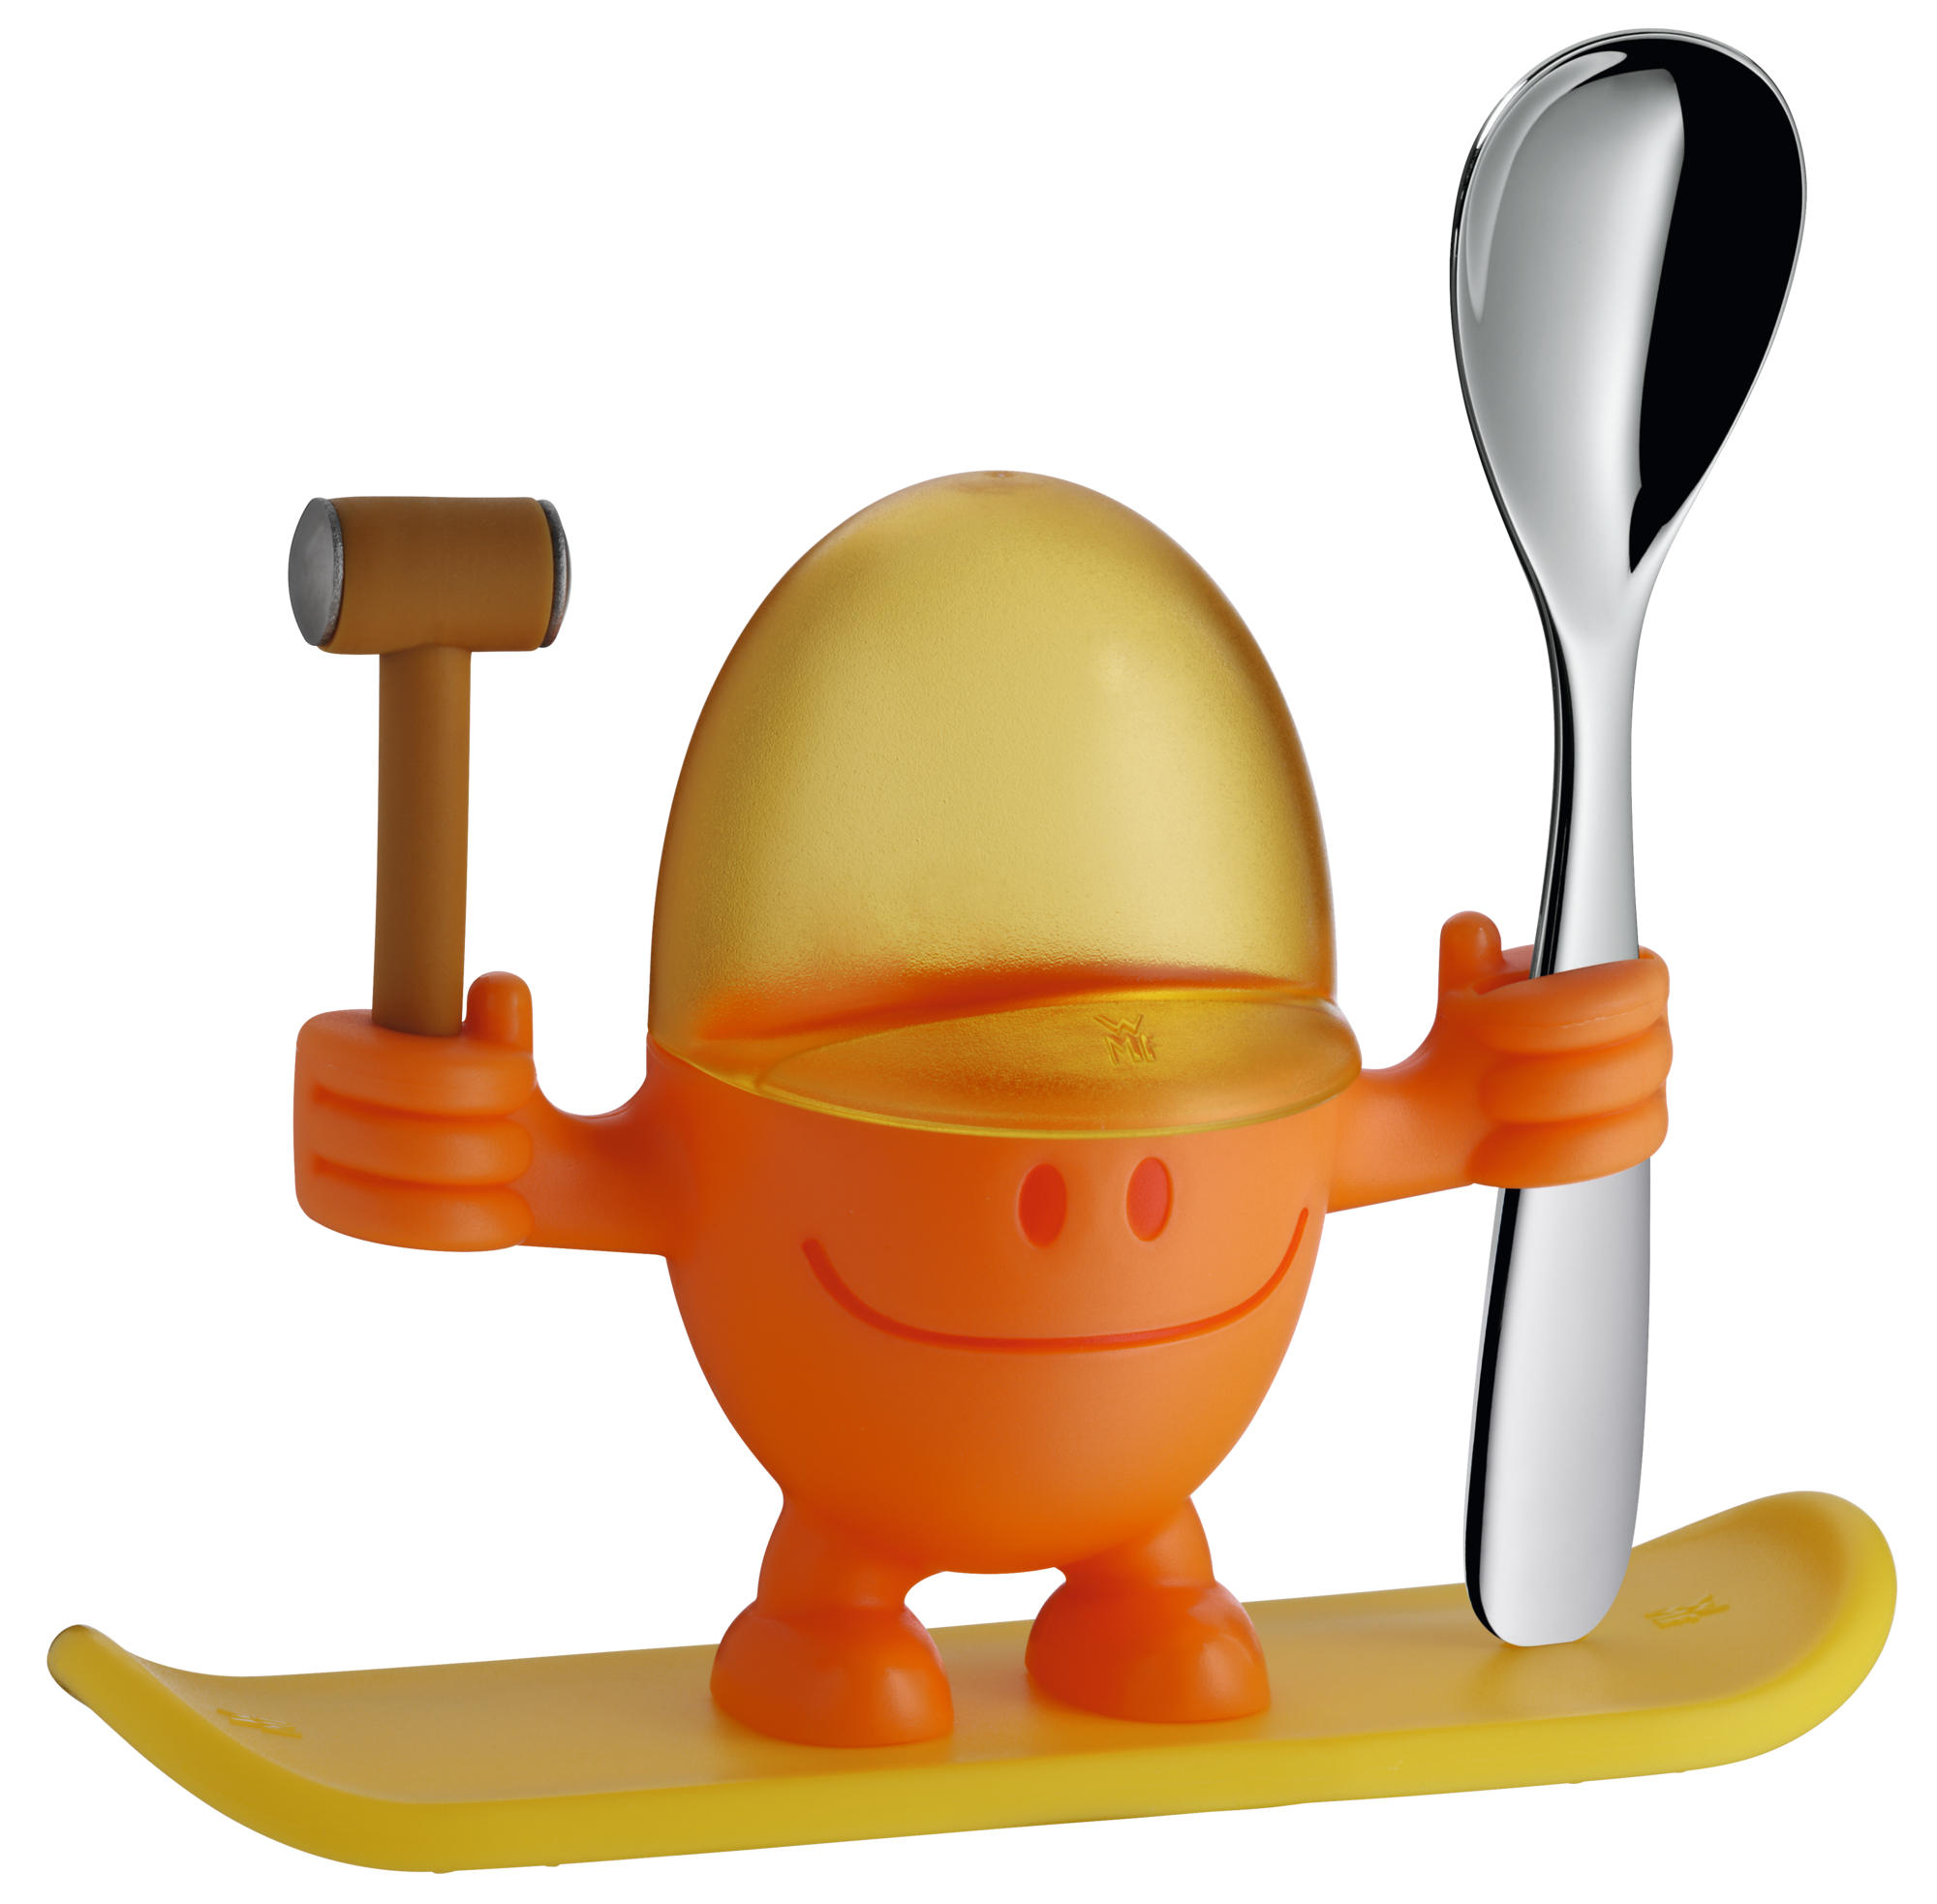 Egg cup set McEgg with spoon, orange 2-piece